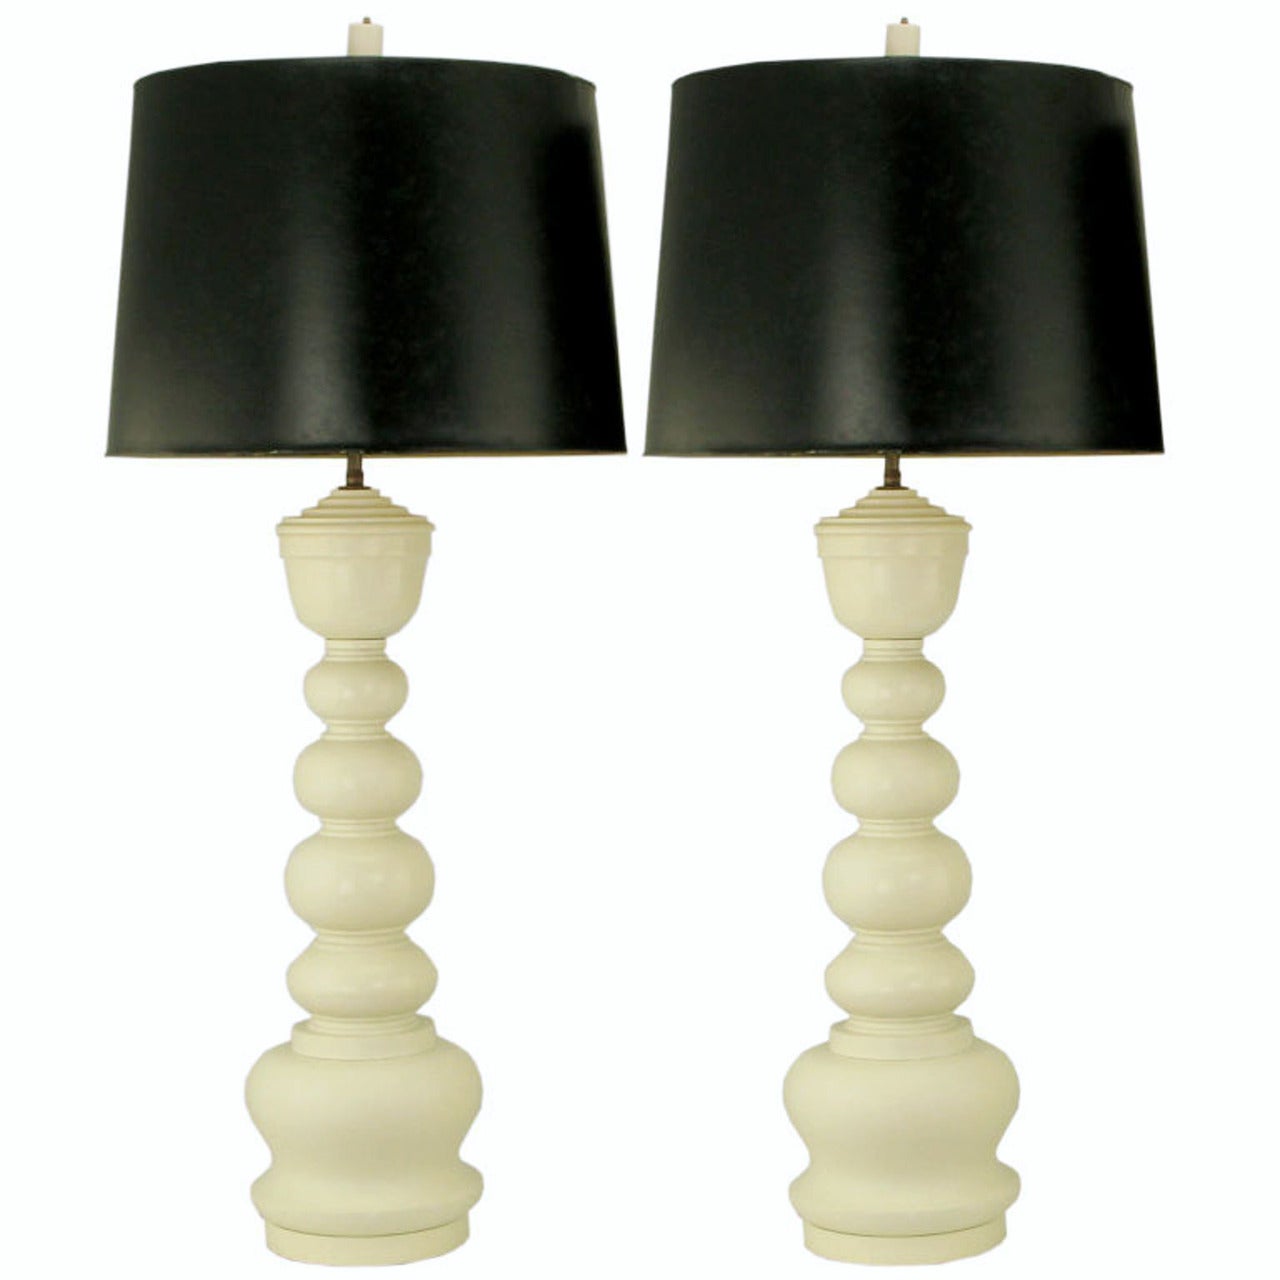 Pair of Turned White Lacquer Table Lamps after James Mont